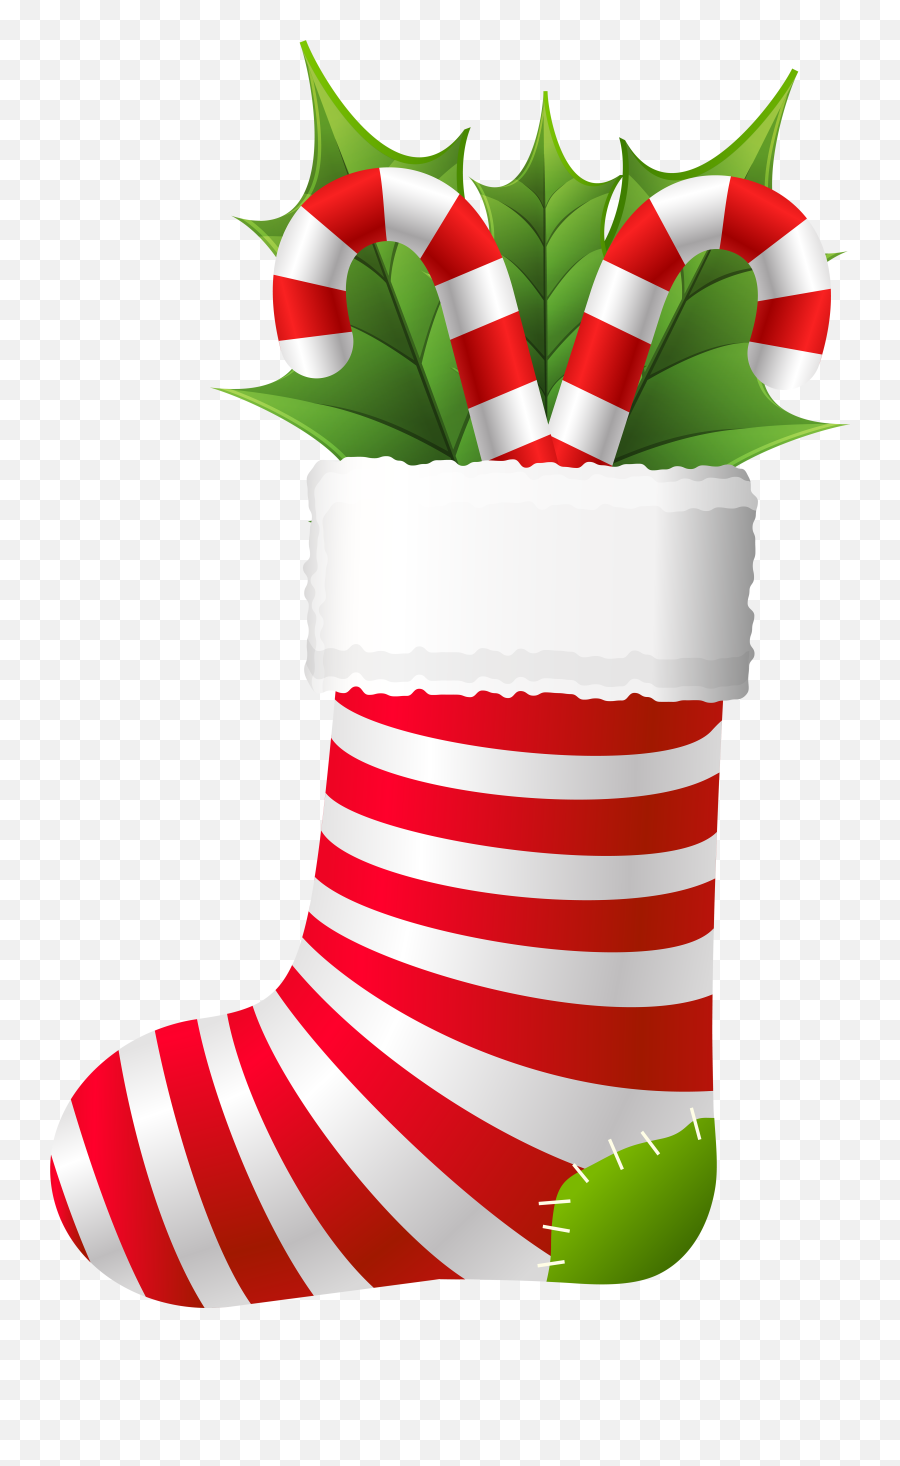 Holly Clipart Candy Cane Holly Candy - For Holiday Emoji,Holly Clipart